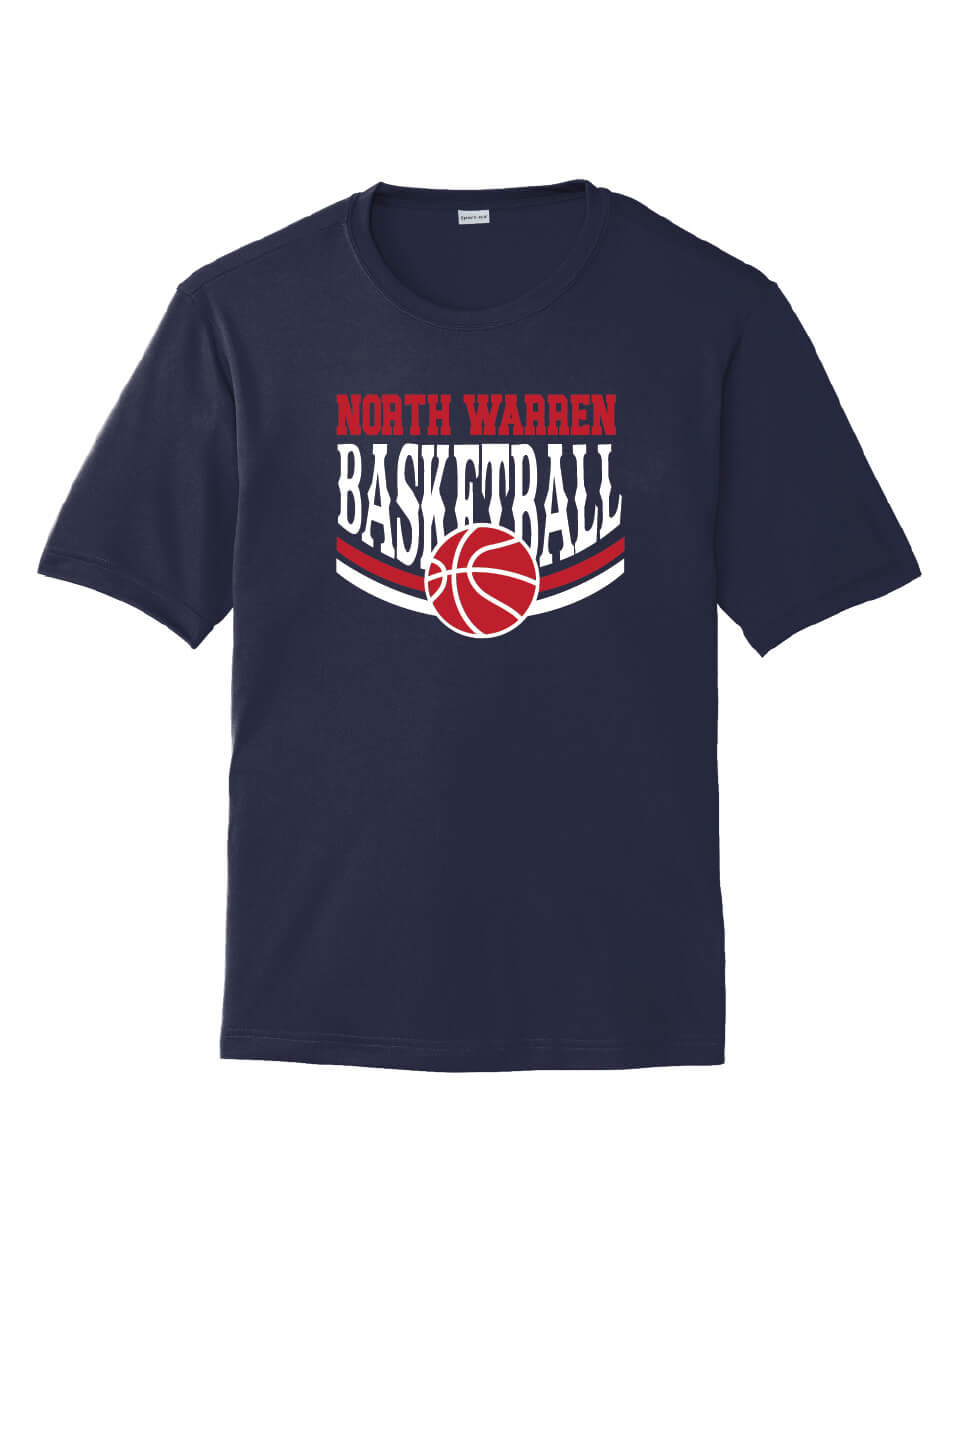 NW Basketball Sport Tek Competitor Short Sleeve Tee (Youth) navy